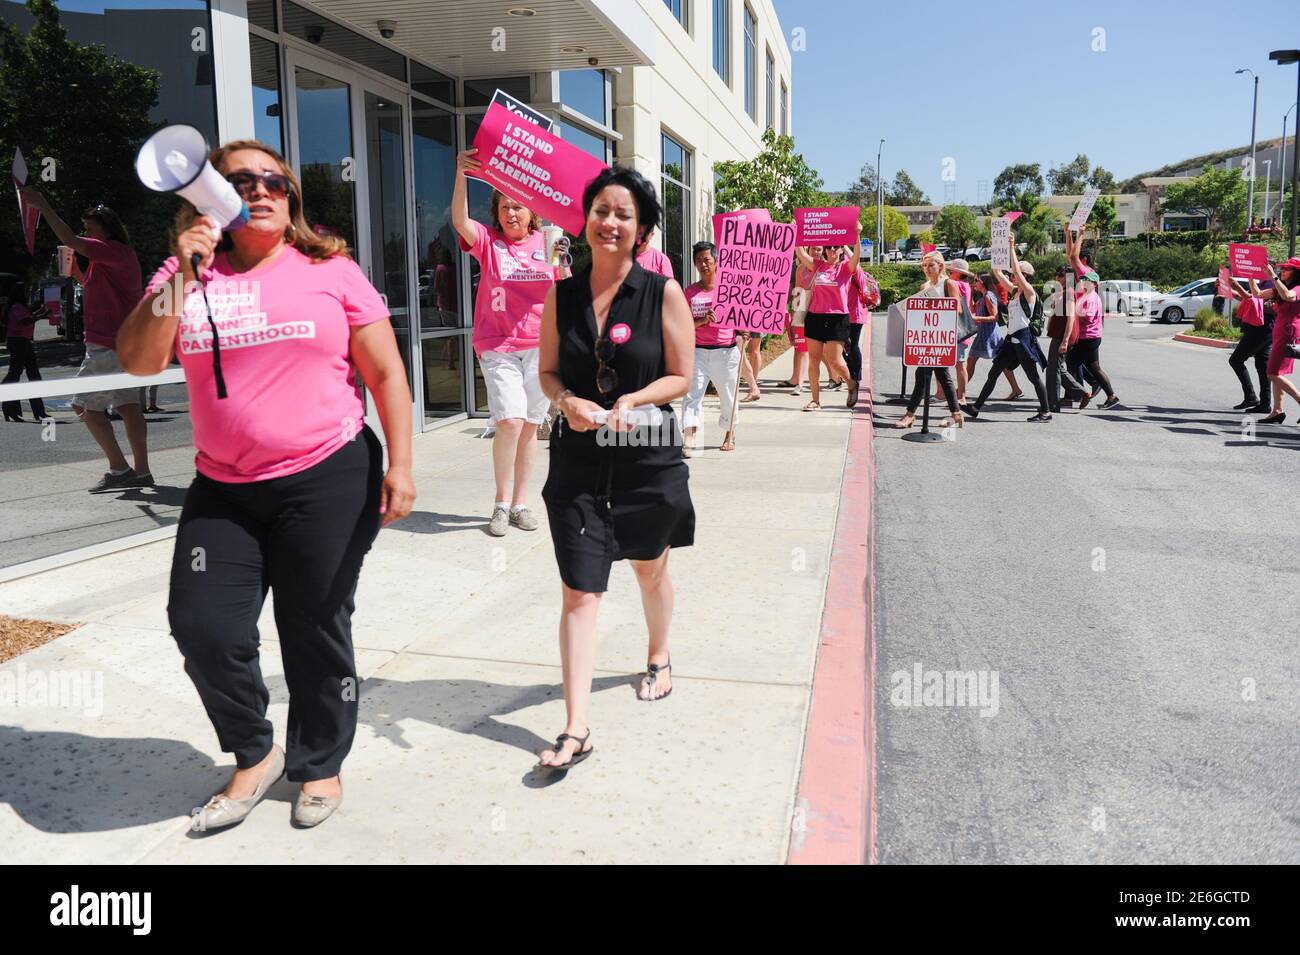 Supporters of Planned Parenthood march in front of the office of Congressman Steve Knight during a rally to fight back against the U.S. House of Representatives' vote to repeal the Affordable Care Act  in Santa Clarita, Los Angeles, California, U.S., May 4, 2017.  REUTERS/Andrew Cullen Stock Photo